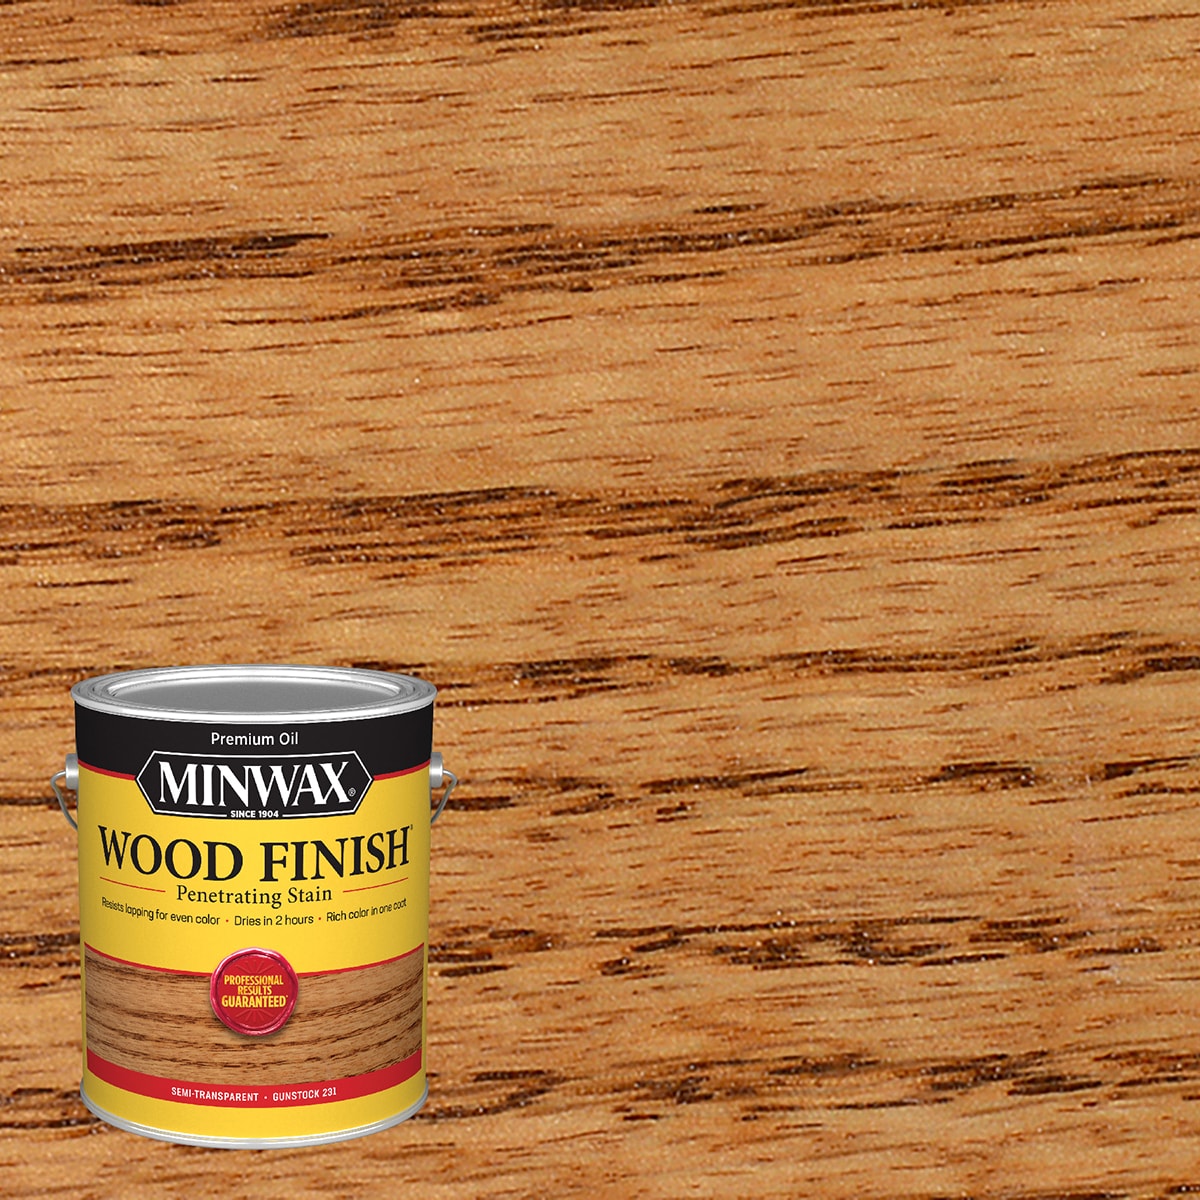 Howard Oil-based Wood Polish and Conditioner (1-Pint) in the Wood